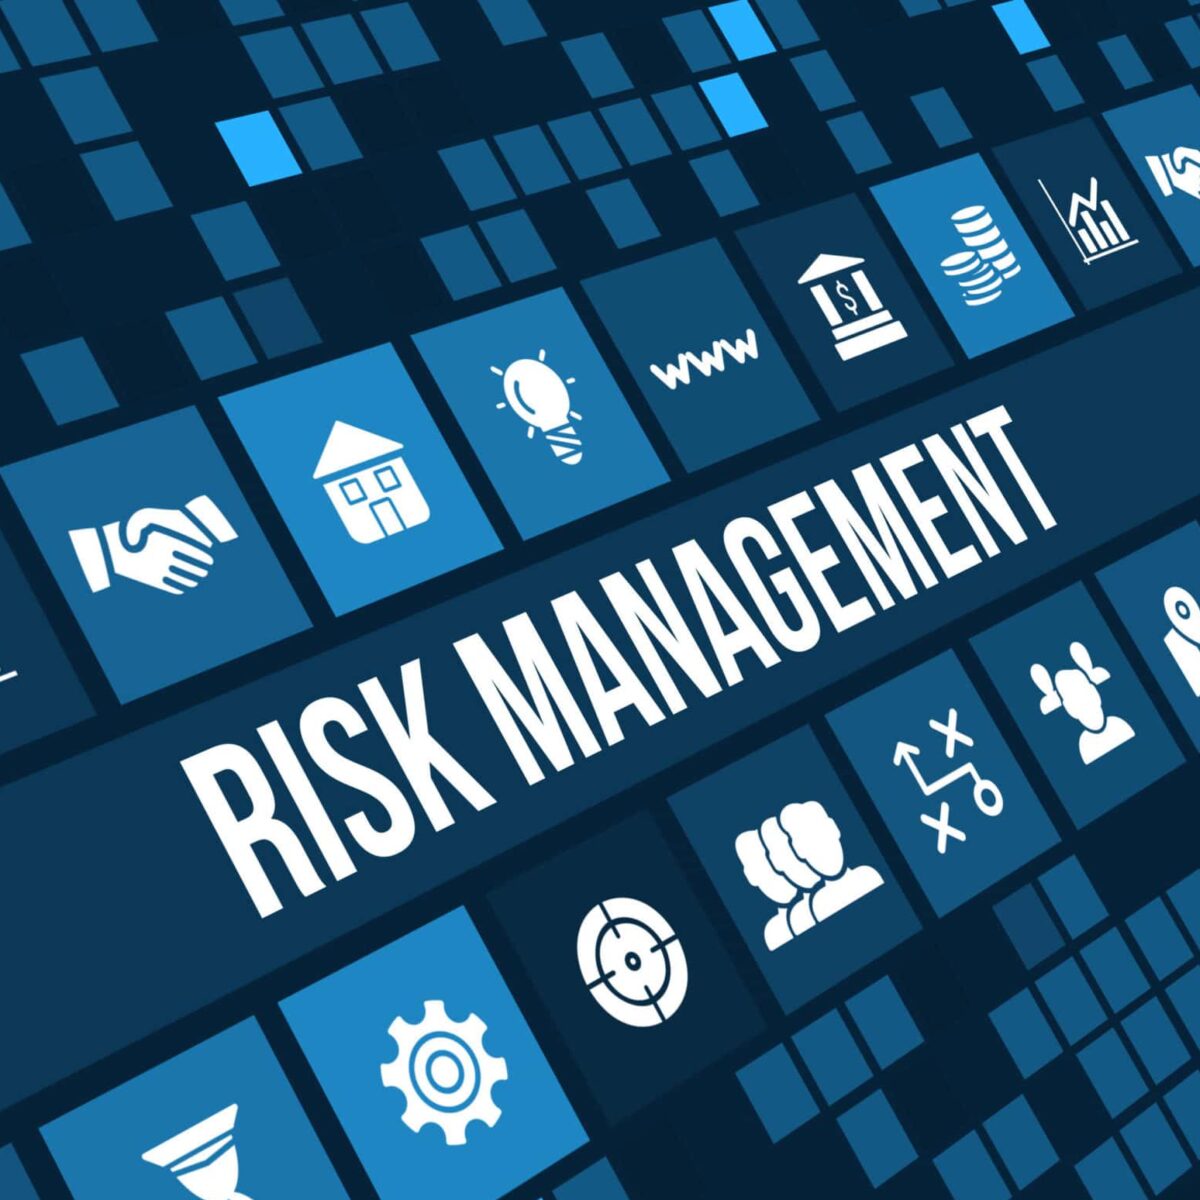 Risk Management concept image with business icons and copyspace.